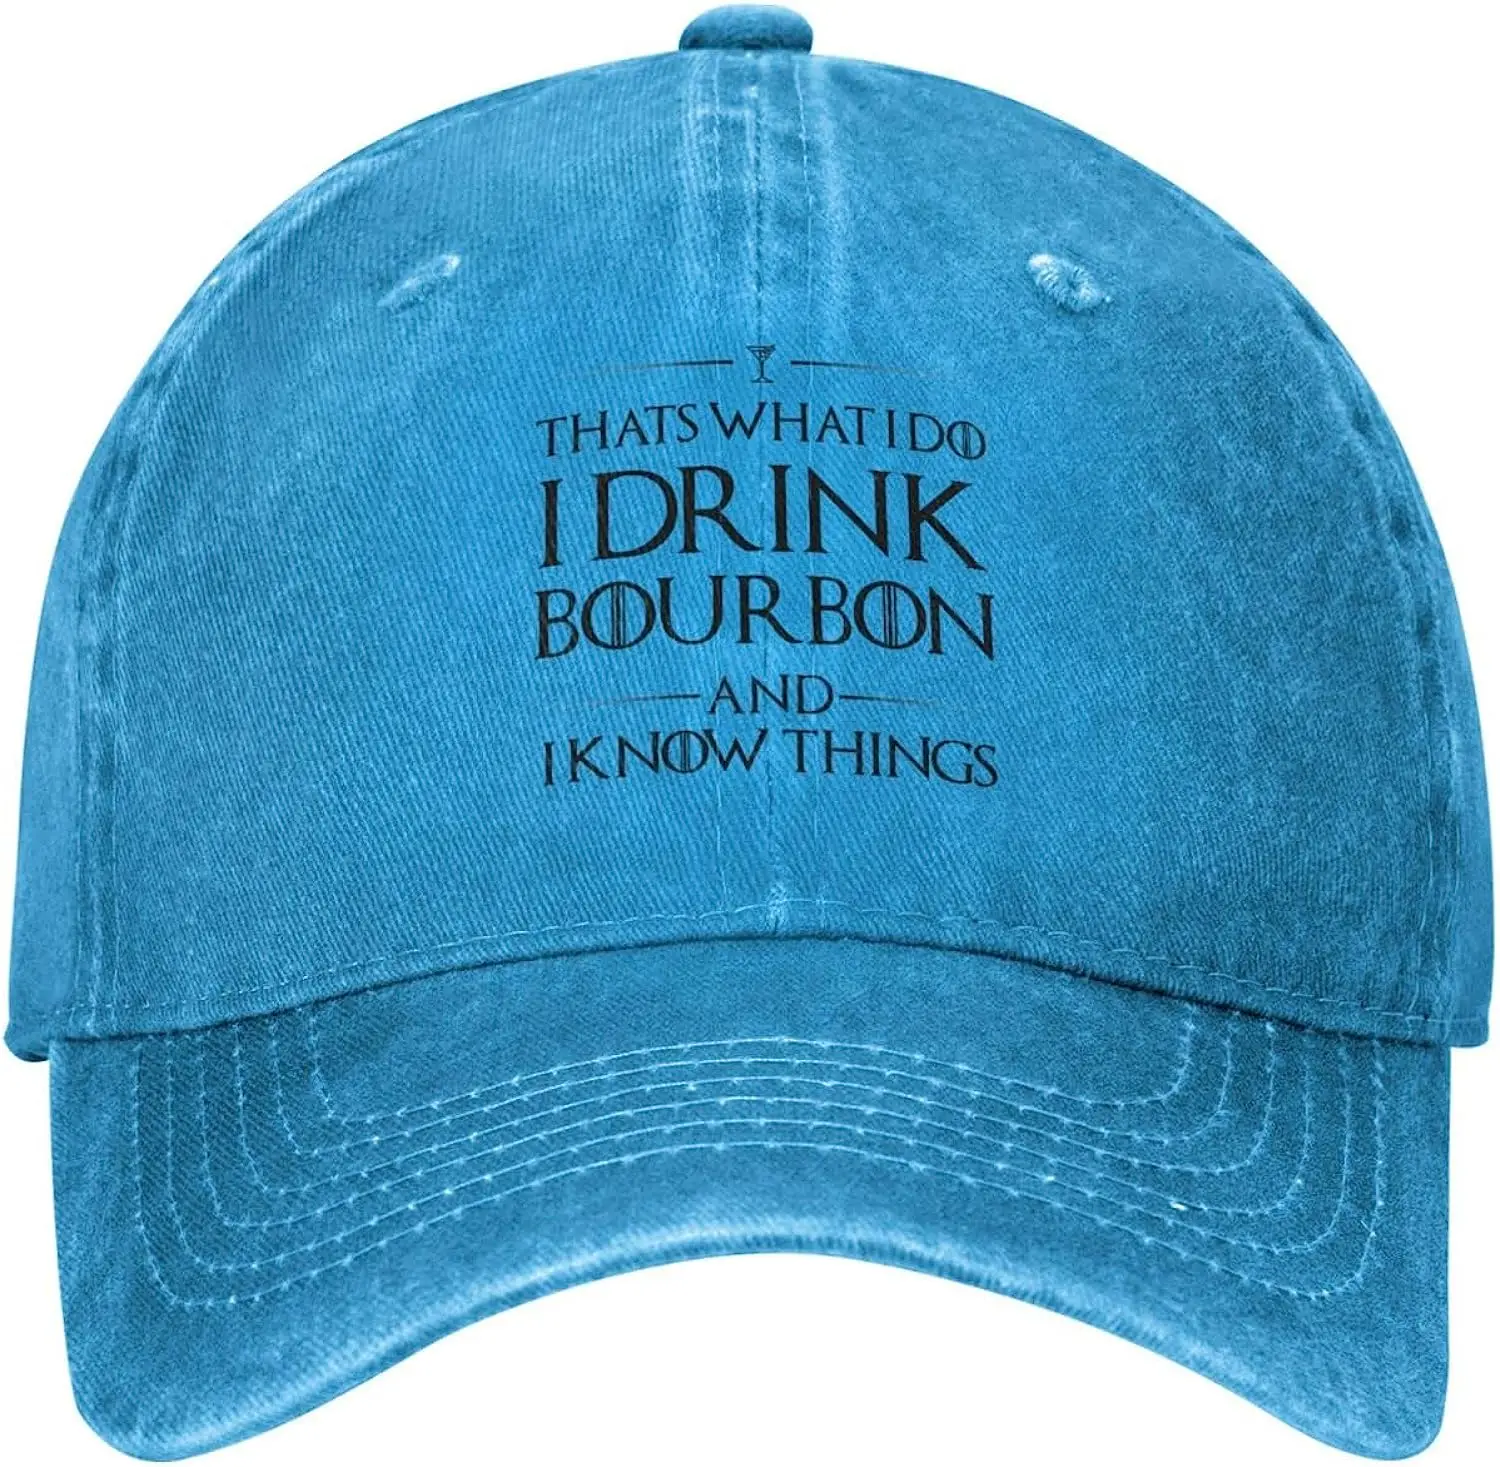 

Funny Hat That's What I Do I Drink Bou-rbon and I Know Things Cap for Women Baseball Cap Cute Hat